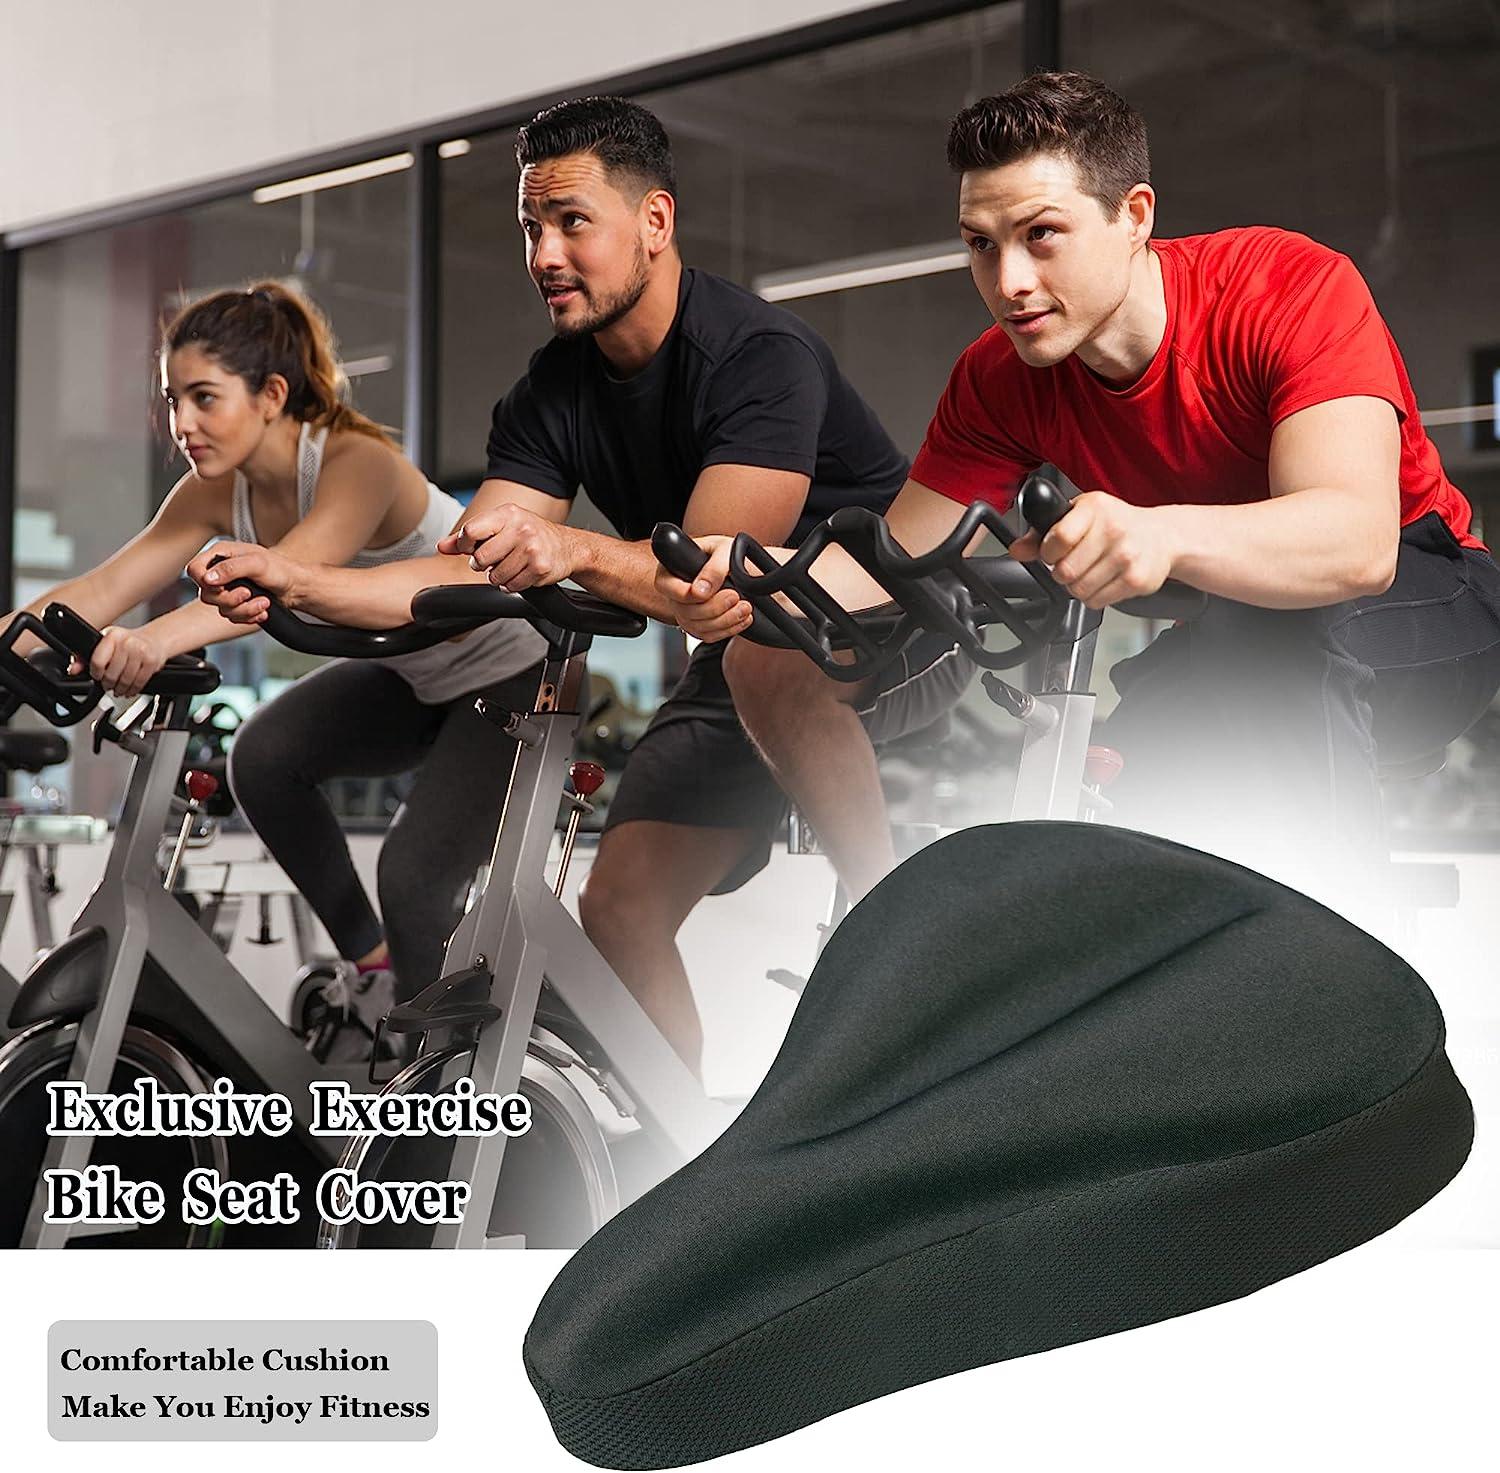 MERACH Exercise Bike Seat Cushion - Most Comfortable Gel Padded Bike Seat Cover for Men & Women, Compatible with Cruiser, Stationary Bike, Exercise